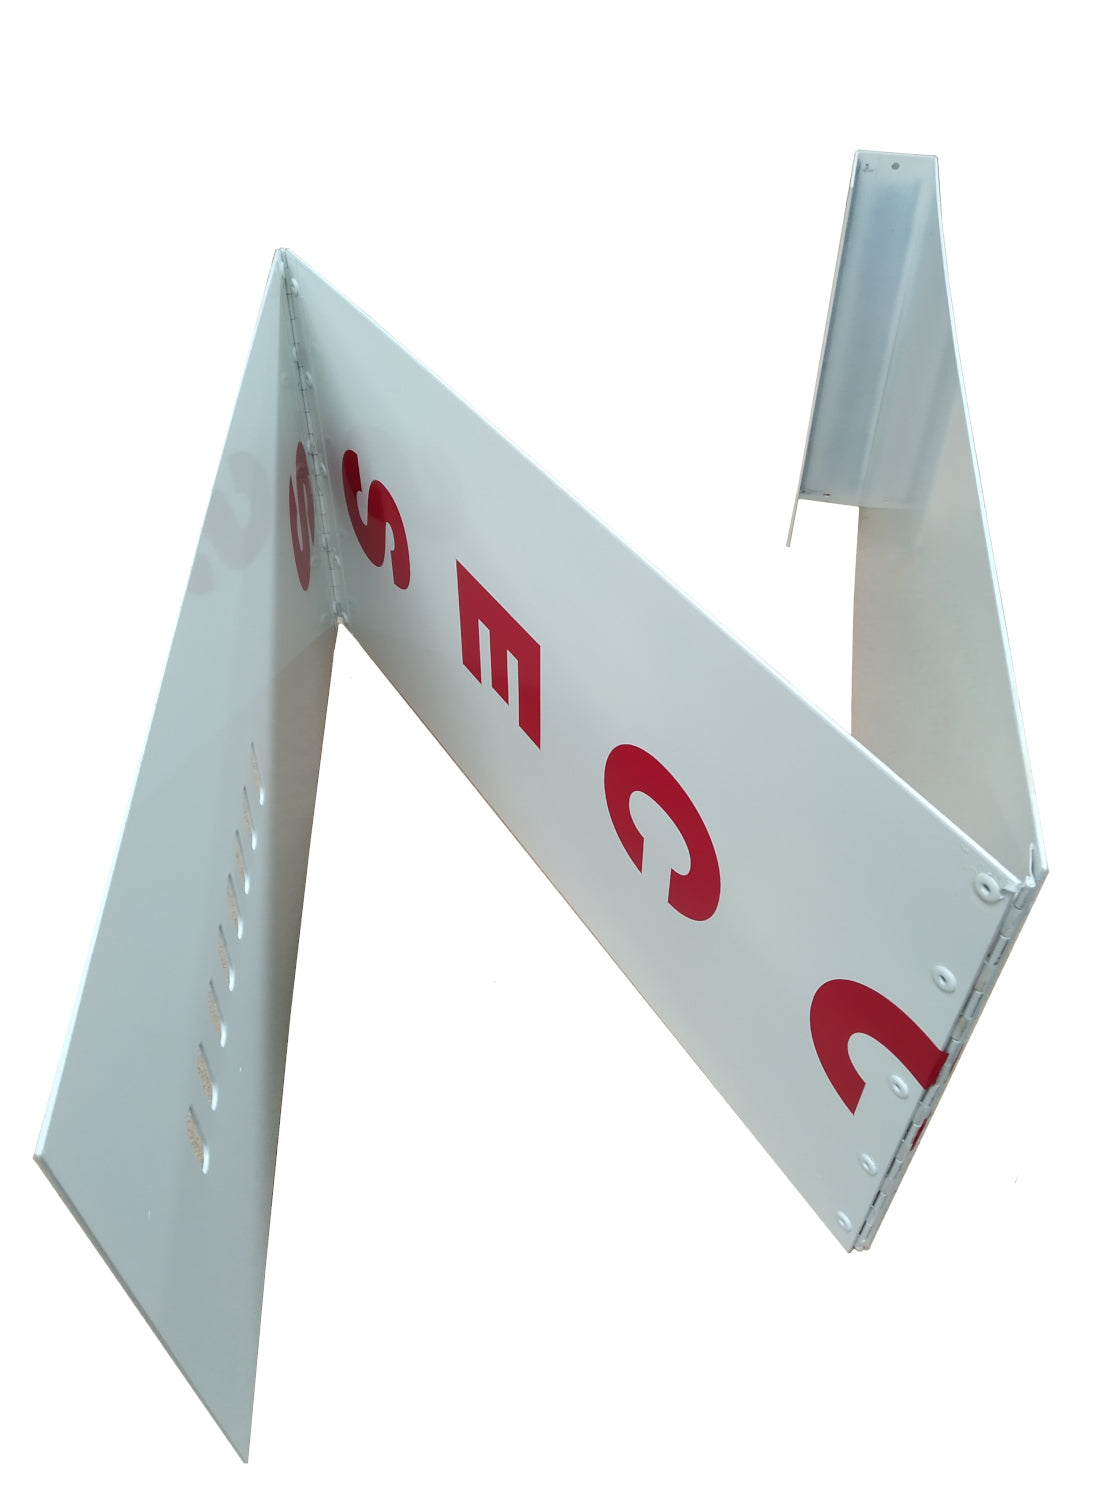 Enamelled Steel Ladder Guard Foldable with Front - NO ACCESS -  Label